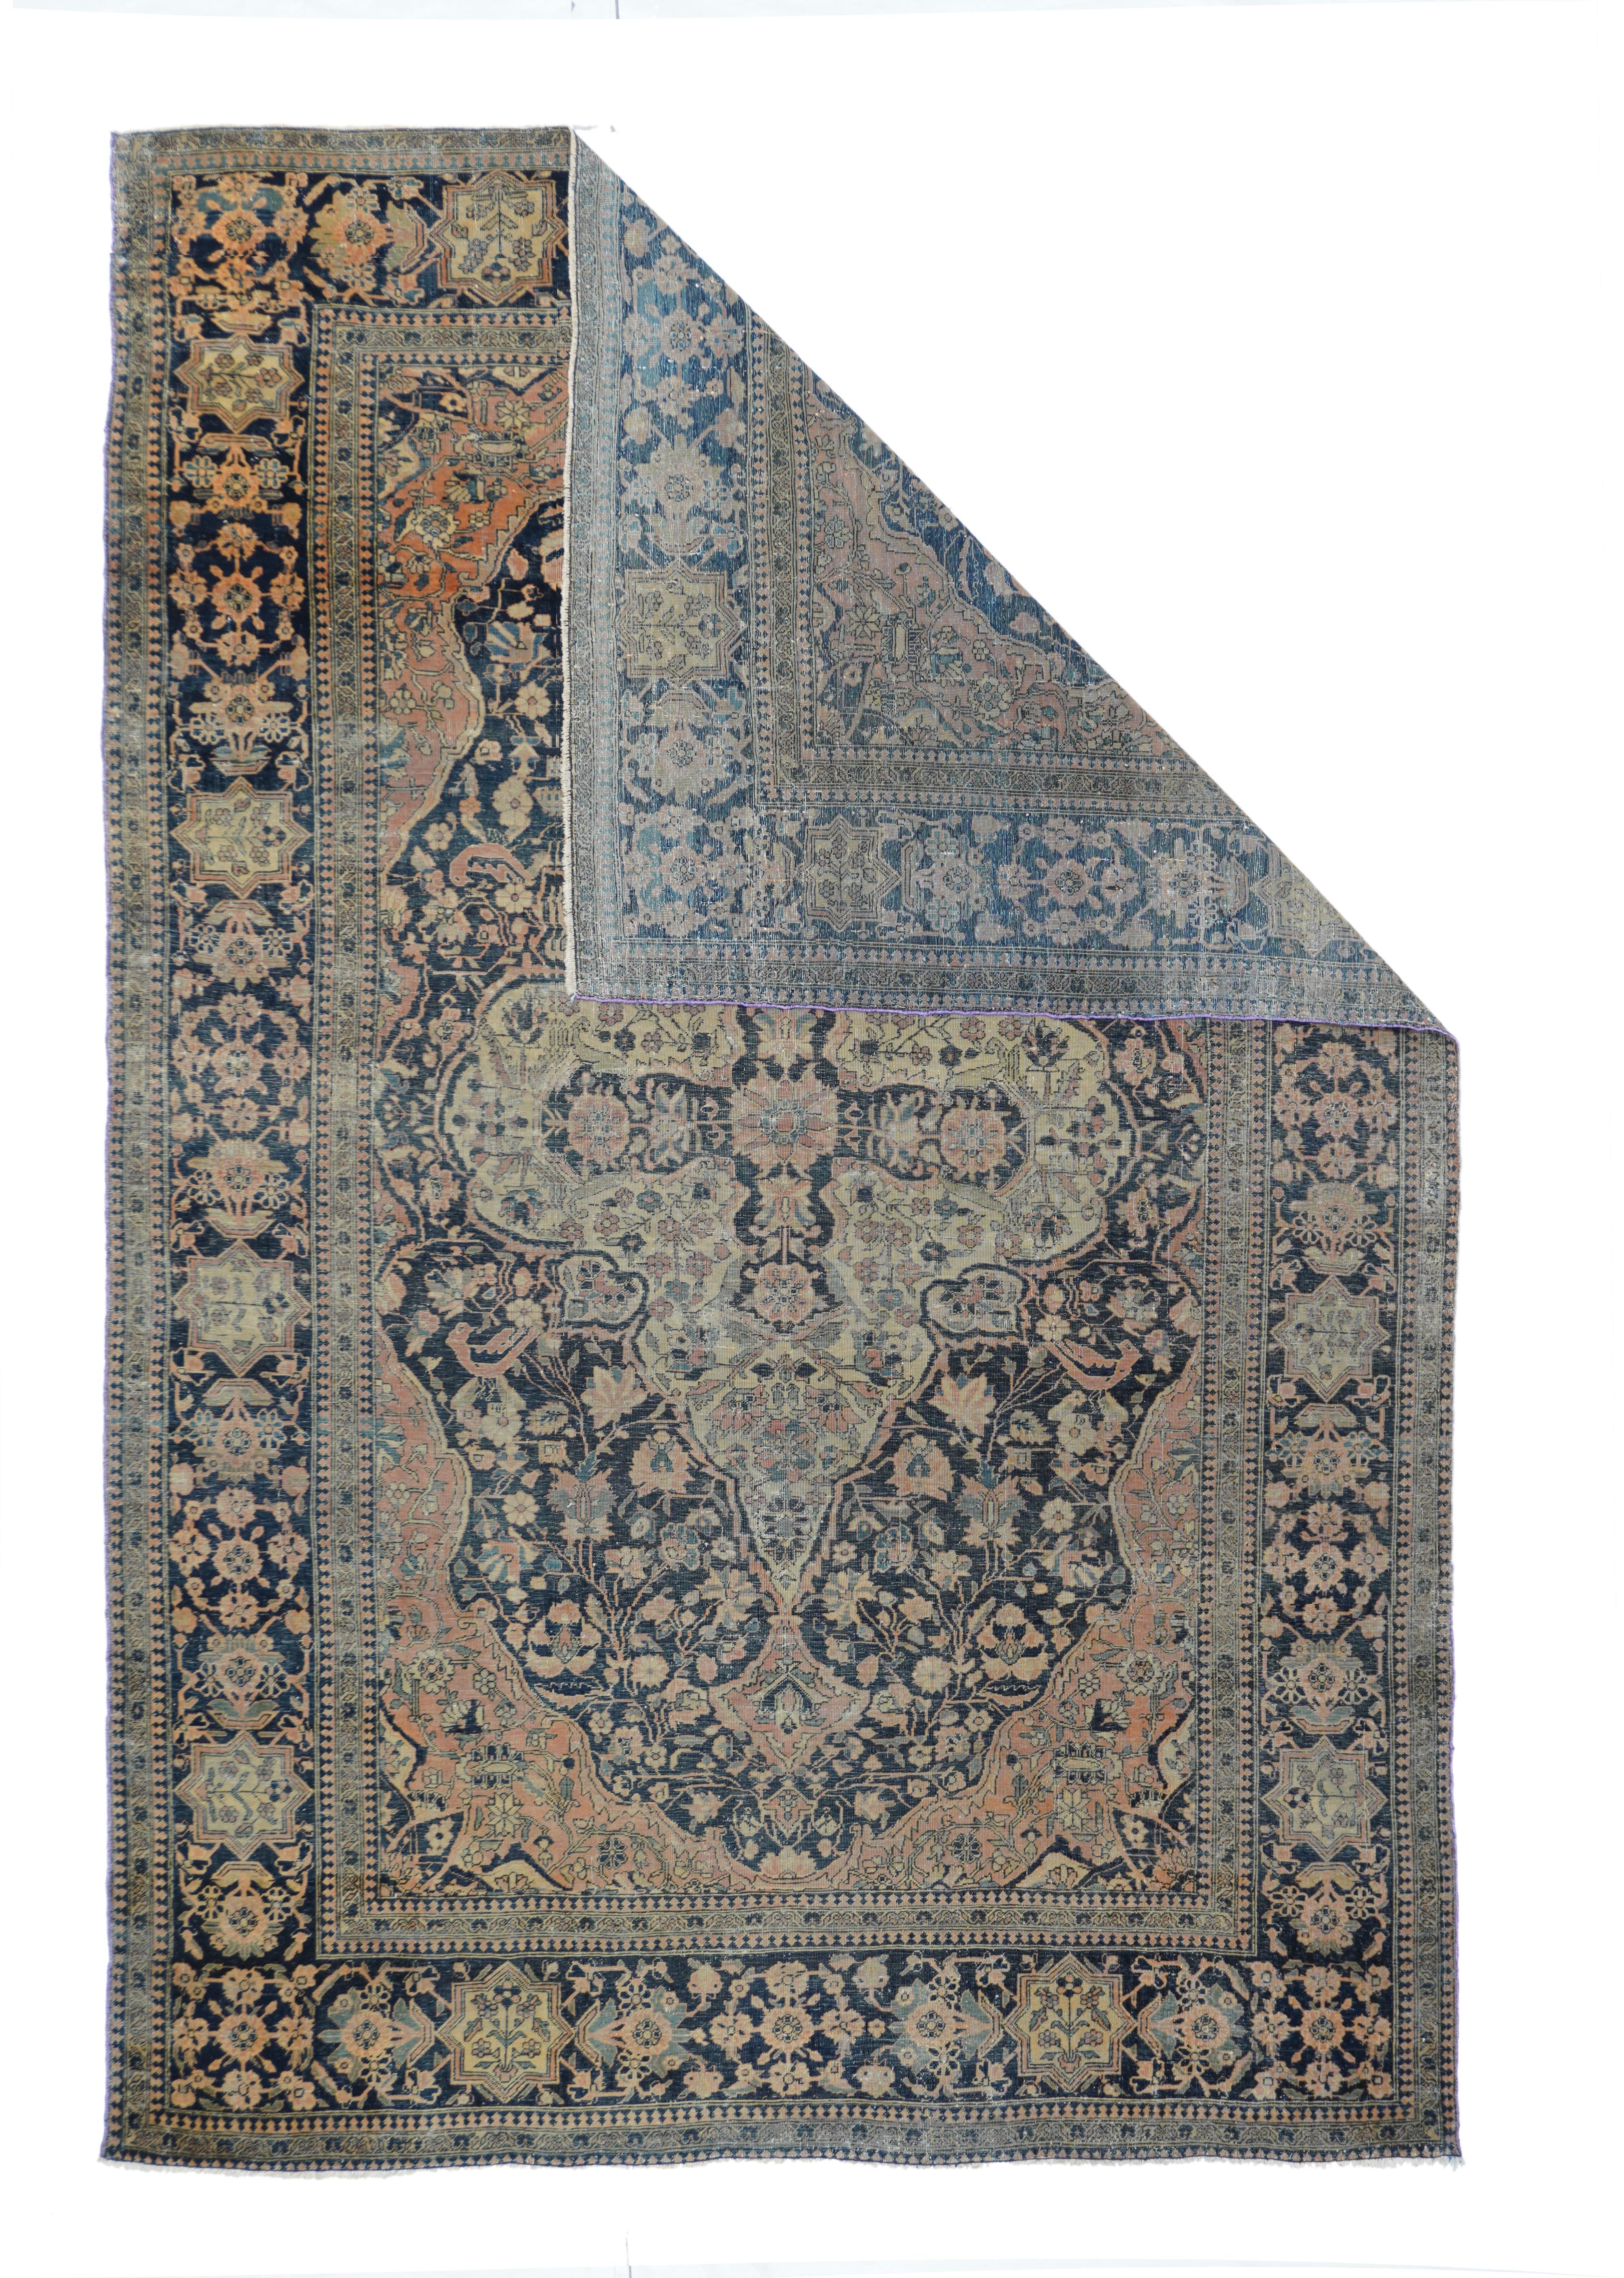 Antique Mohtasham Kashan rug 4'4'' x 6'7''. From the 1880s period of the Great Persian Carpet Revival, this urban, fine weave, central Iranian scatter employs Manchester-spun wool to create a velvety surface, while laid out in a Classic medallion